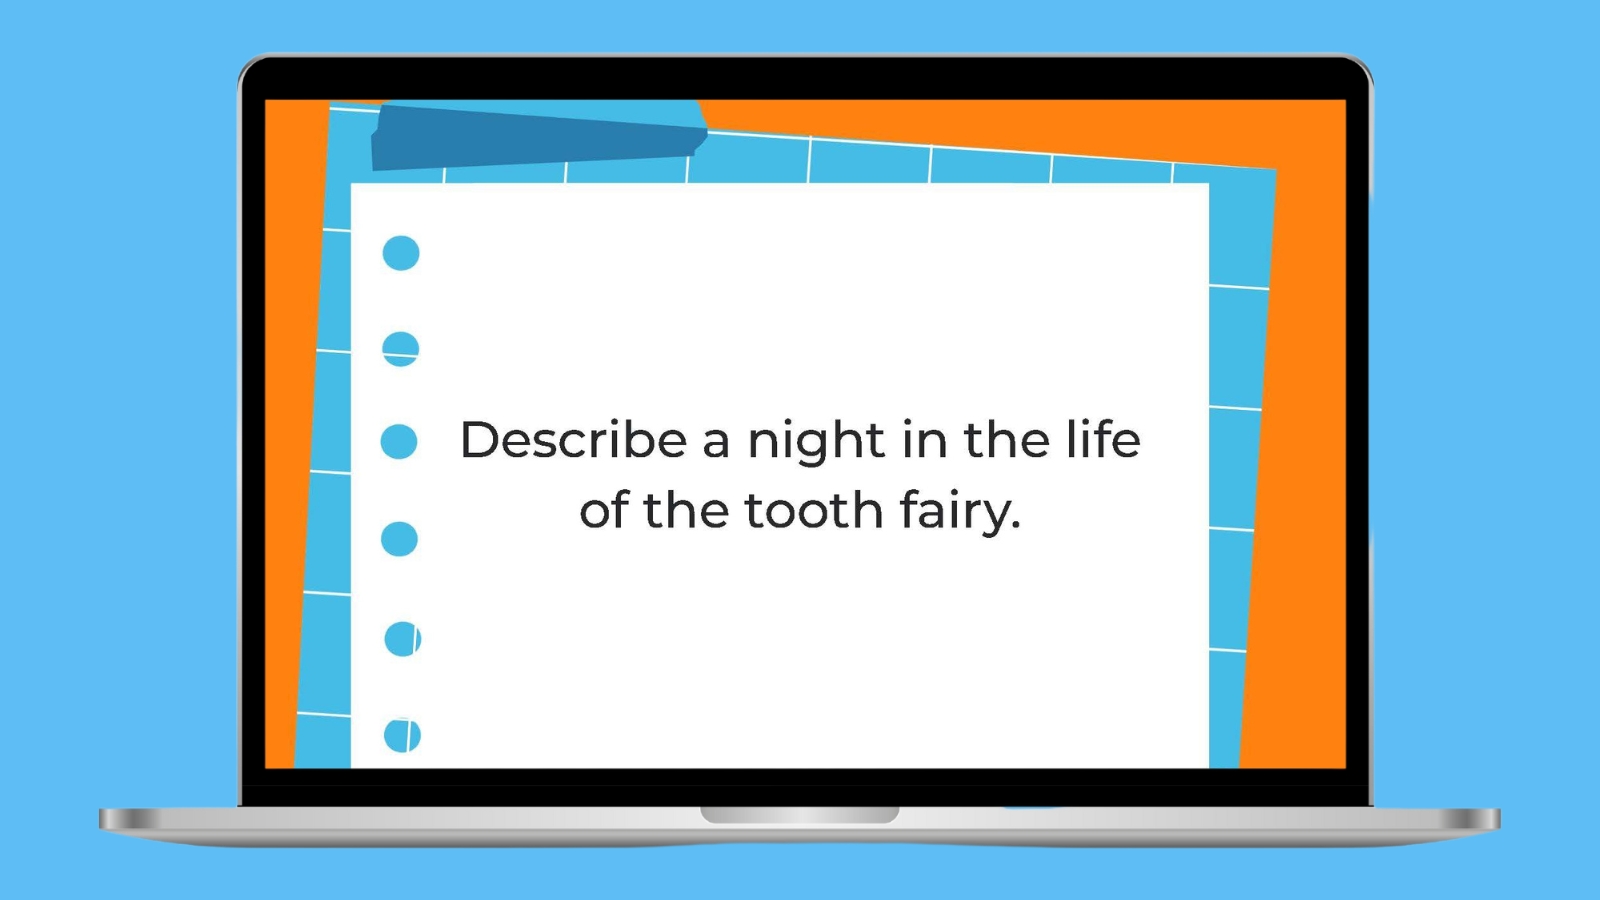 Describe a night in the life of the tooth fairy.